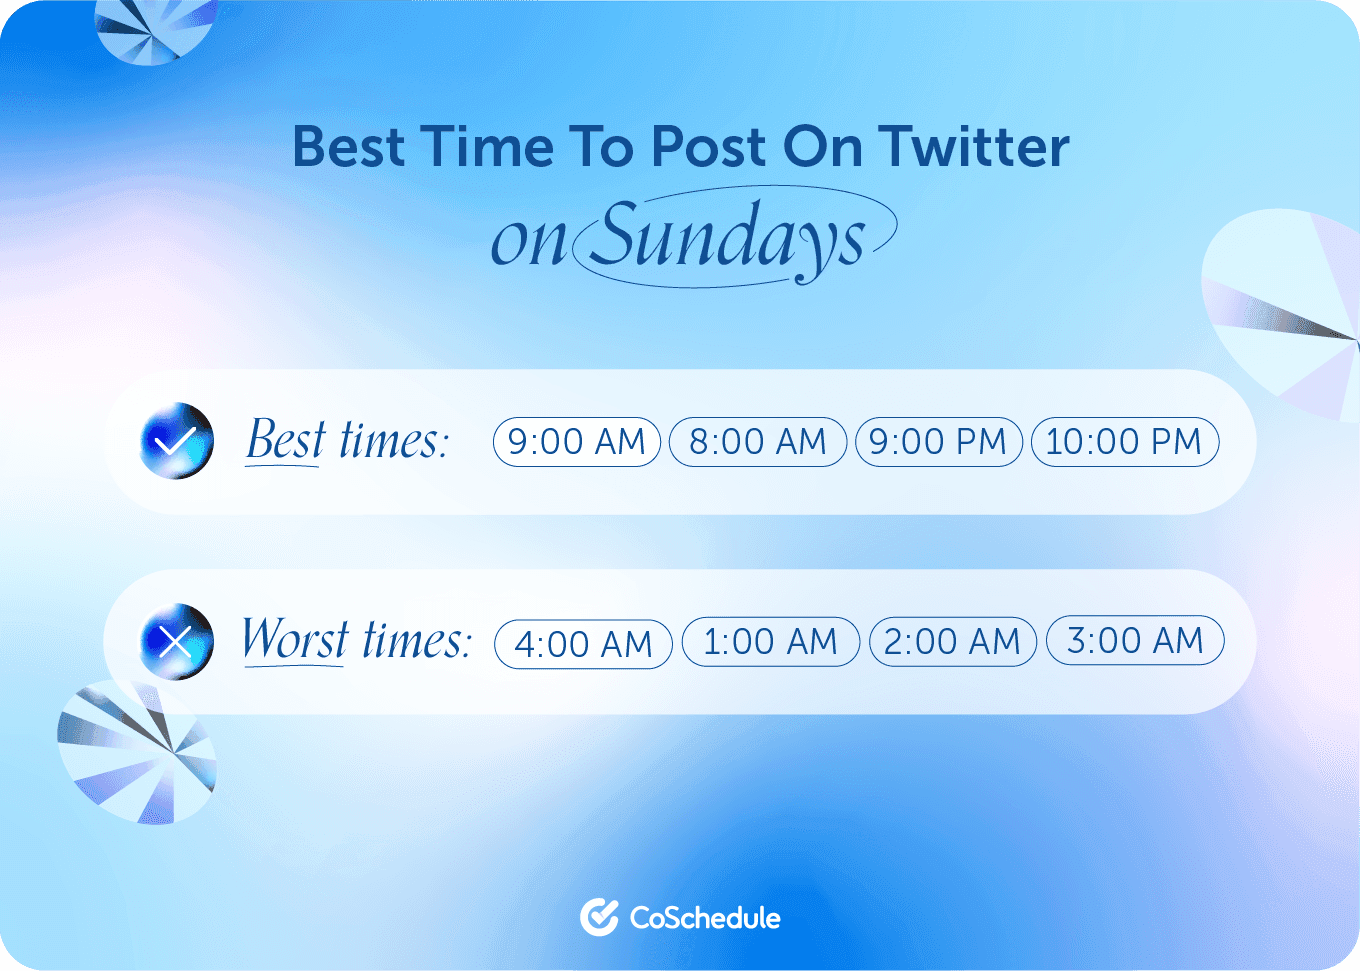 Coschedule graphic on the best times to post to Twitter on Sundays